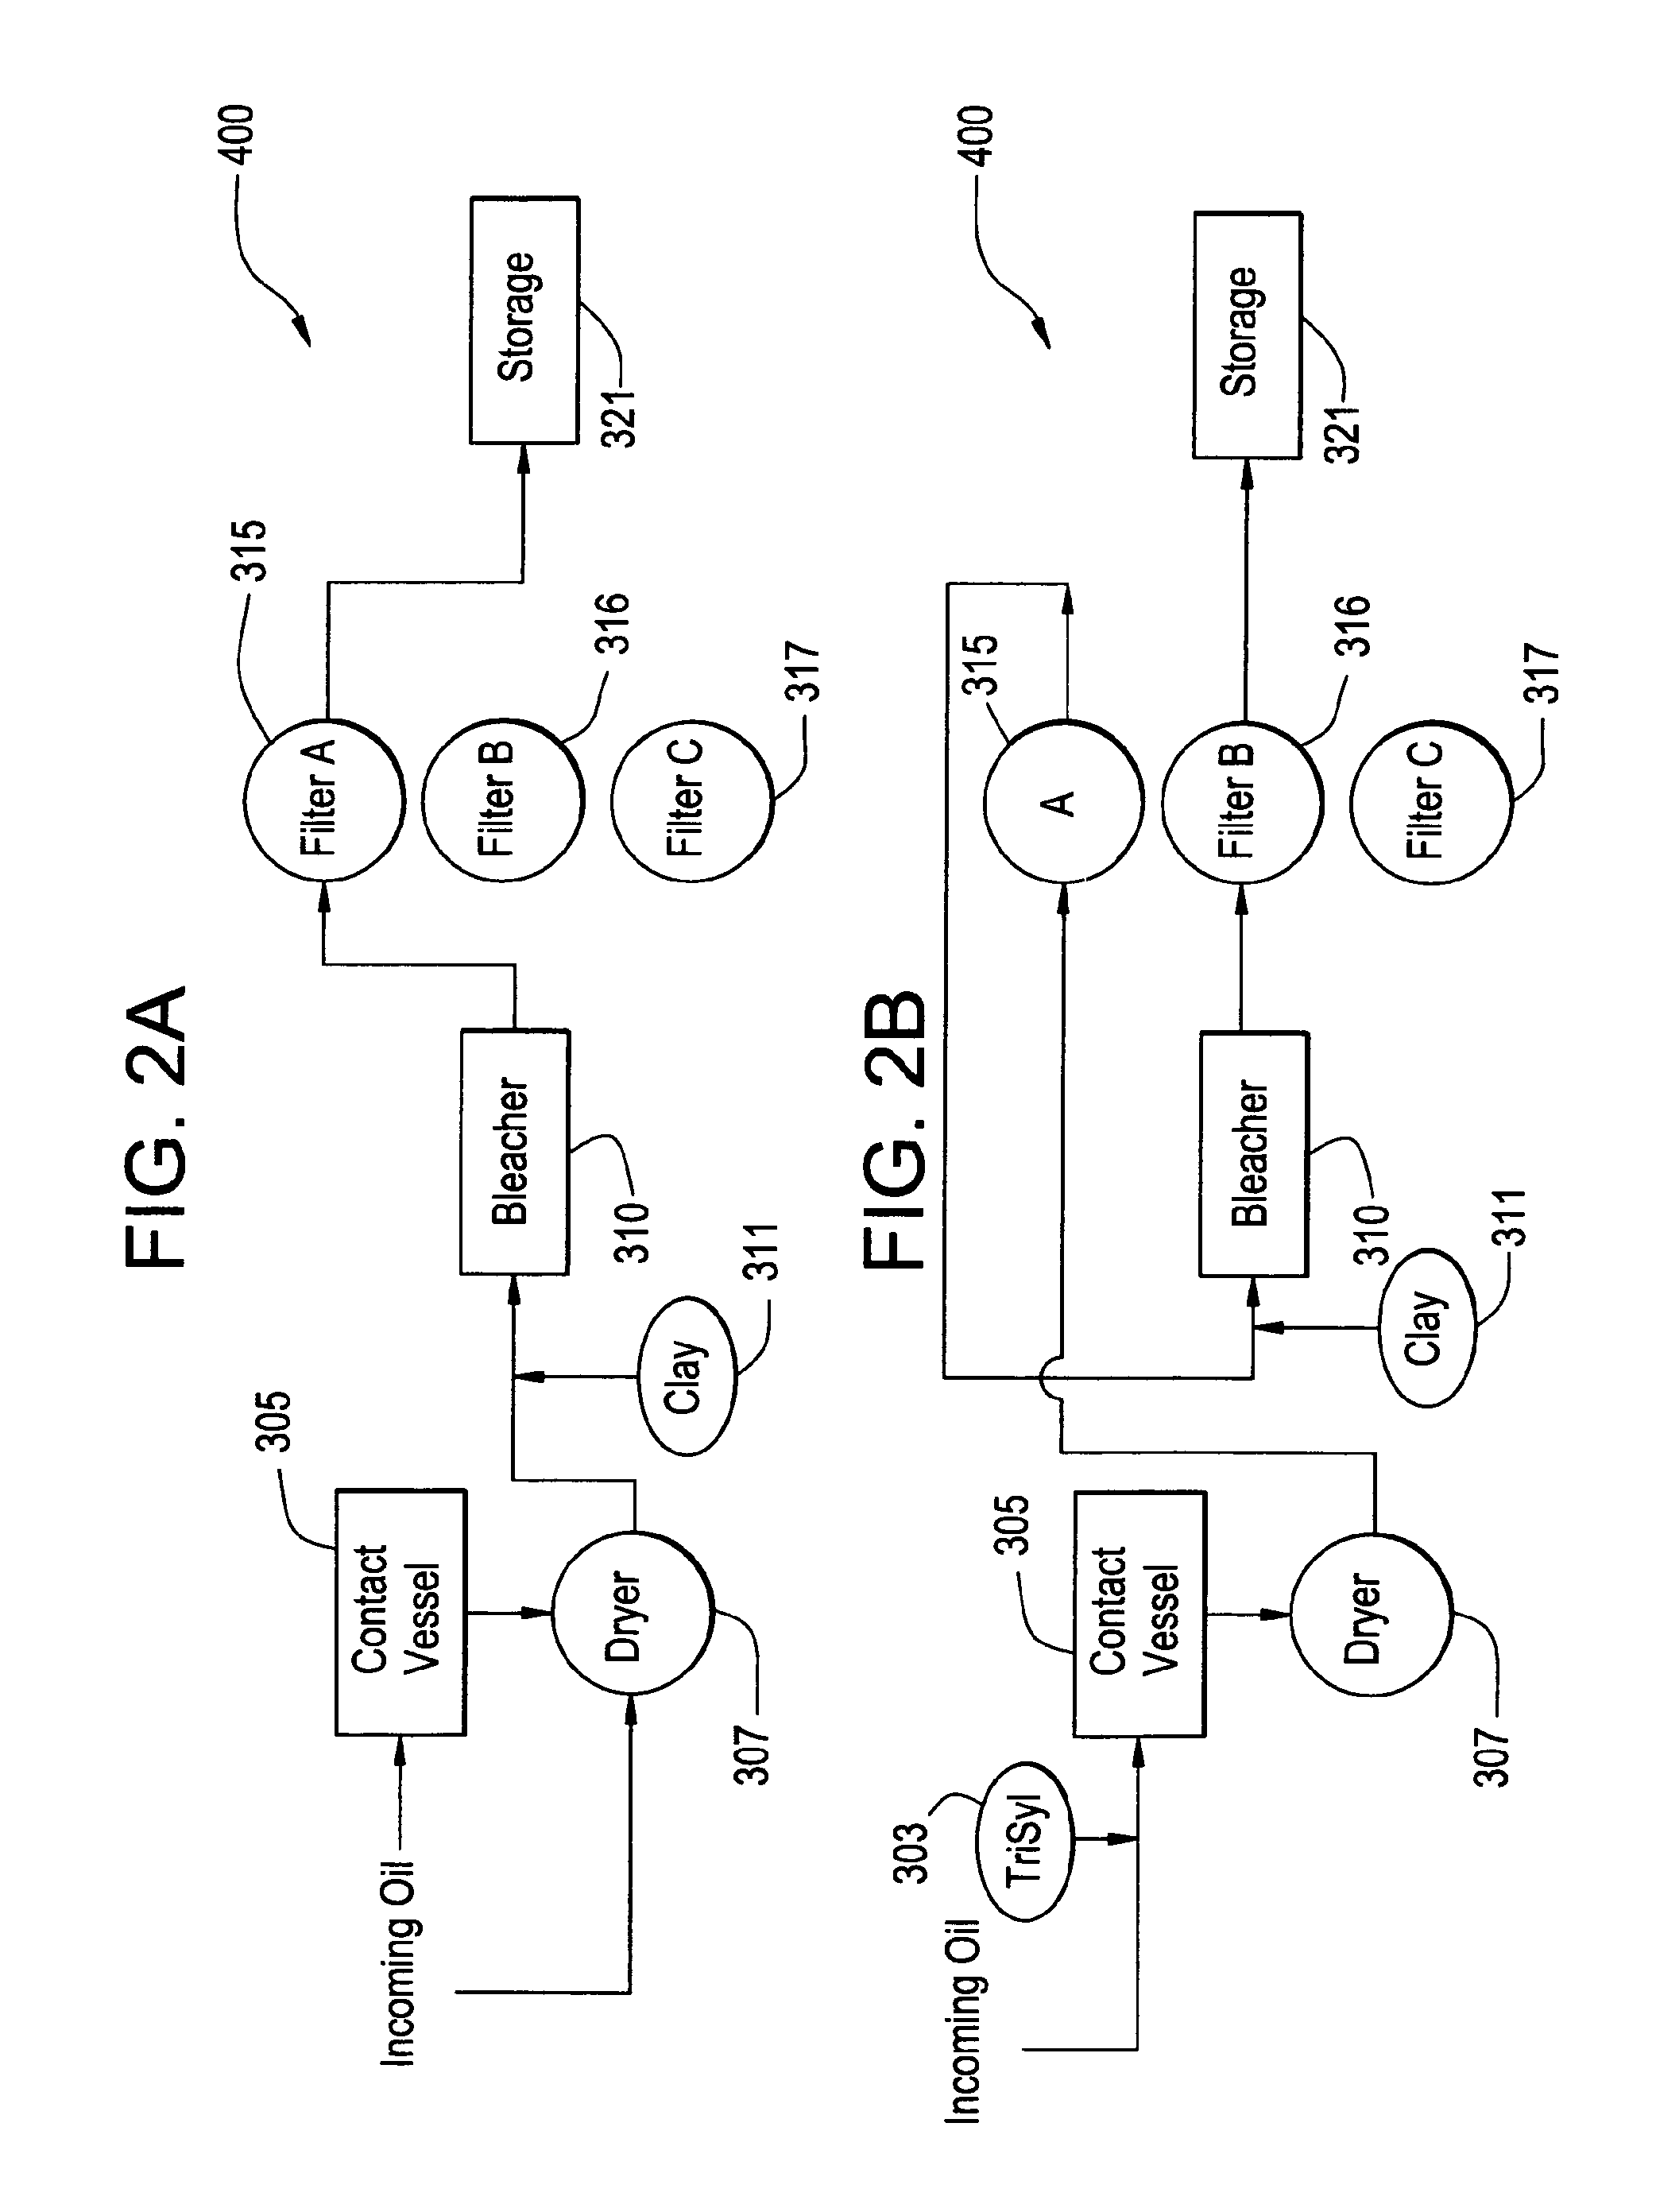 Staggered filtration system and method for using the same for processing fluids such as oils